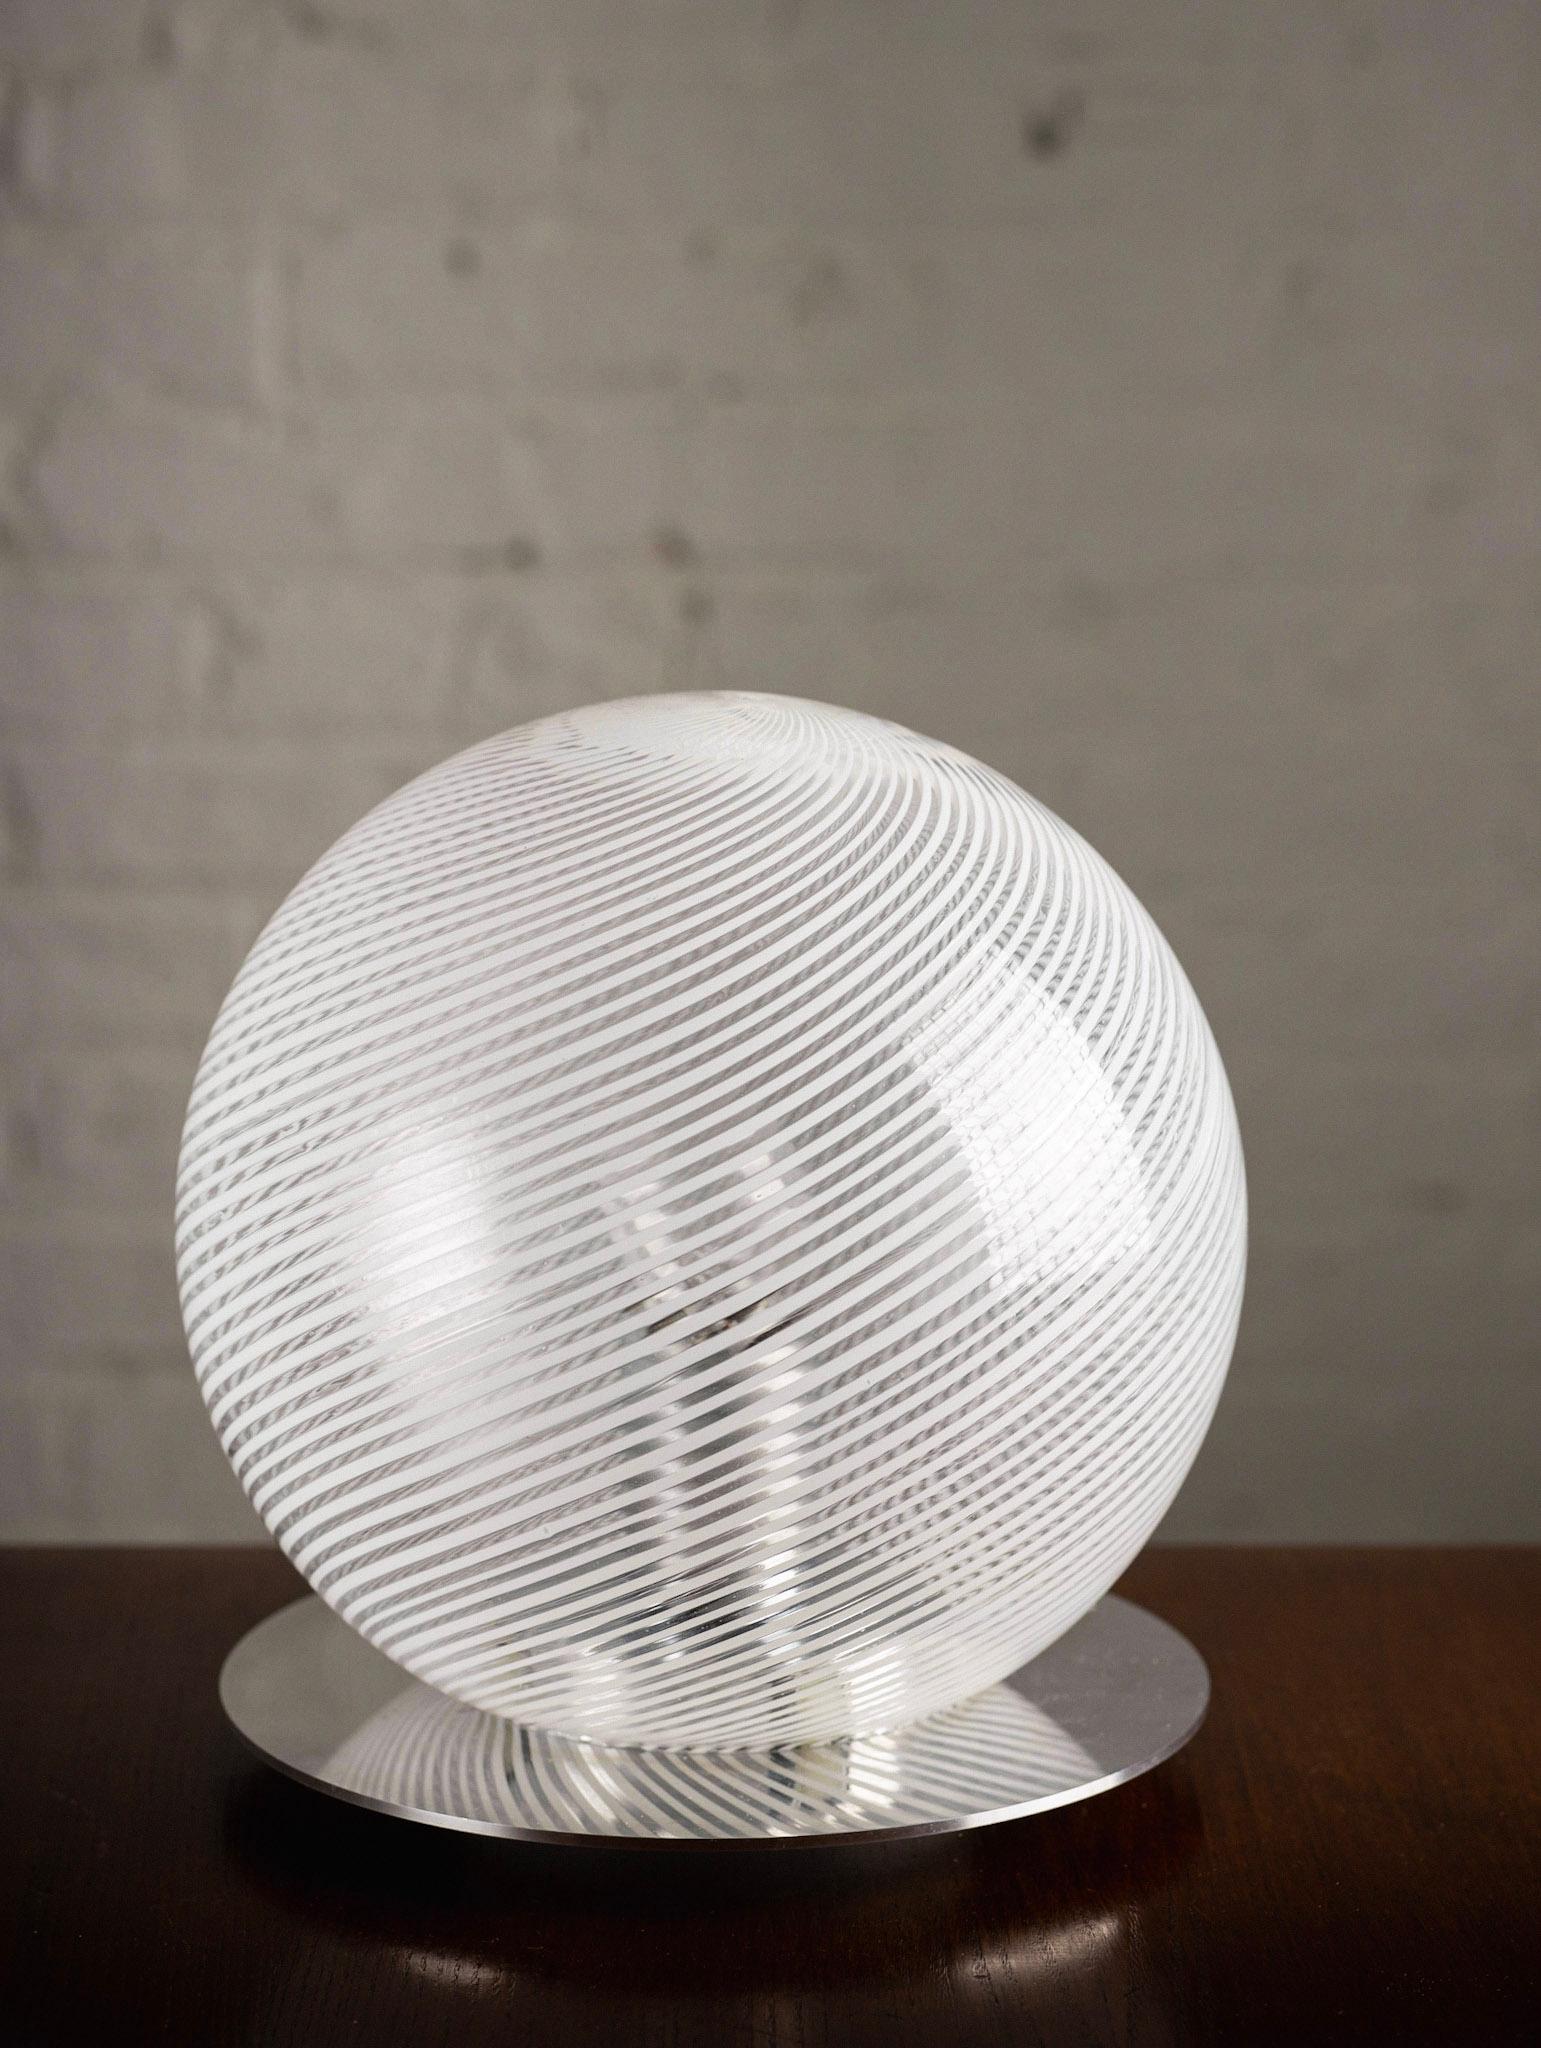 Mid century Murano glass table lamp by Paolo Venini. Transparent and white spiral glass orb on a chrome disc base. Sold individually.
Orb measures 9” in diameter.